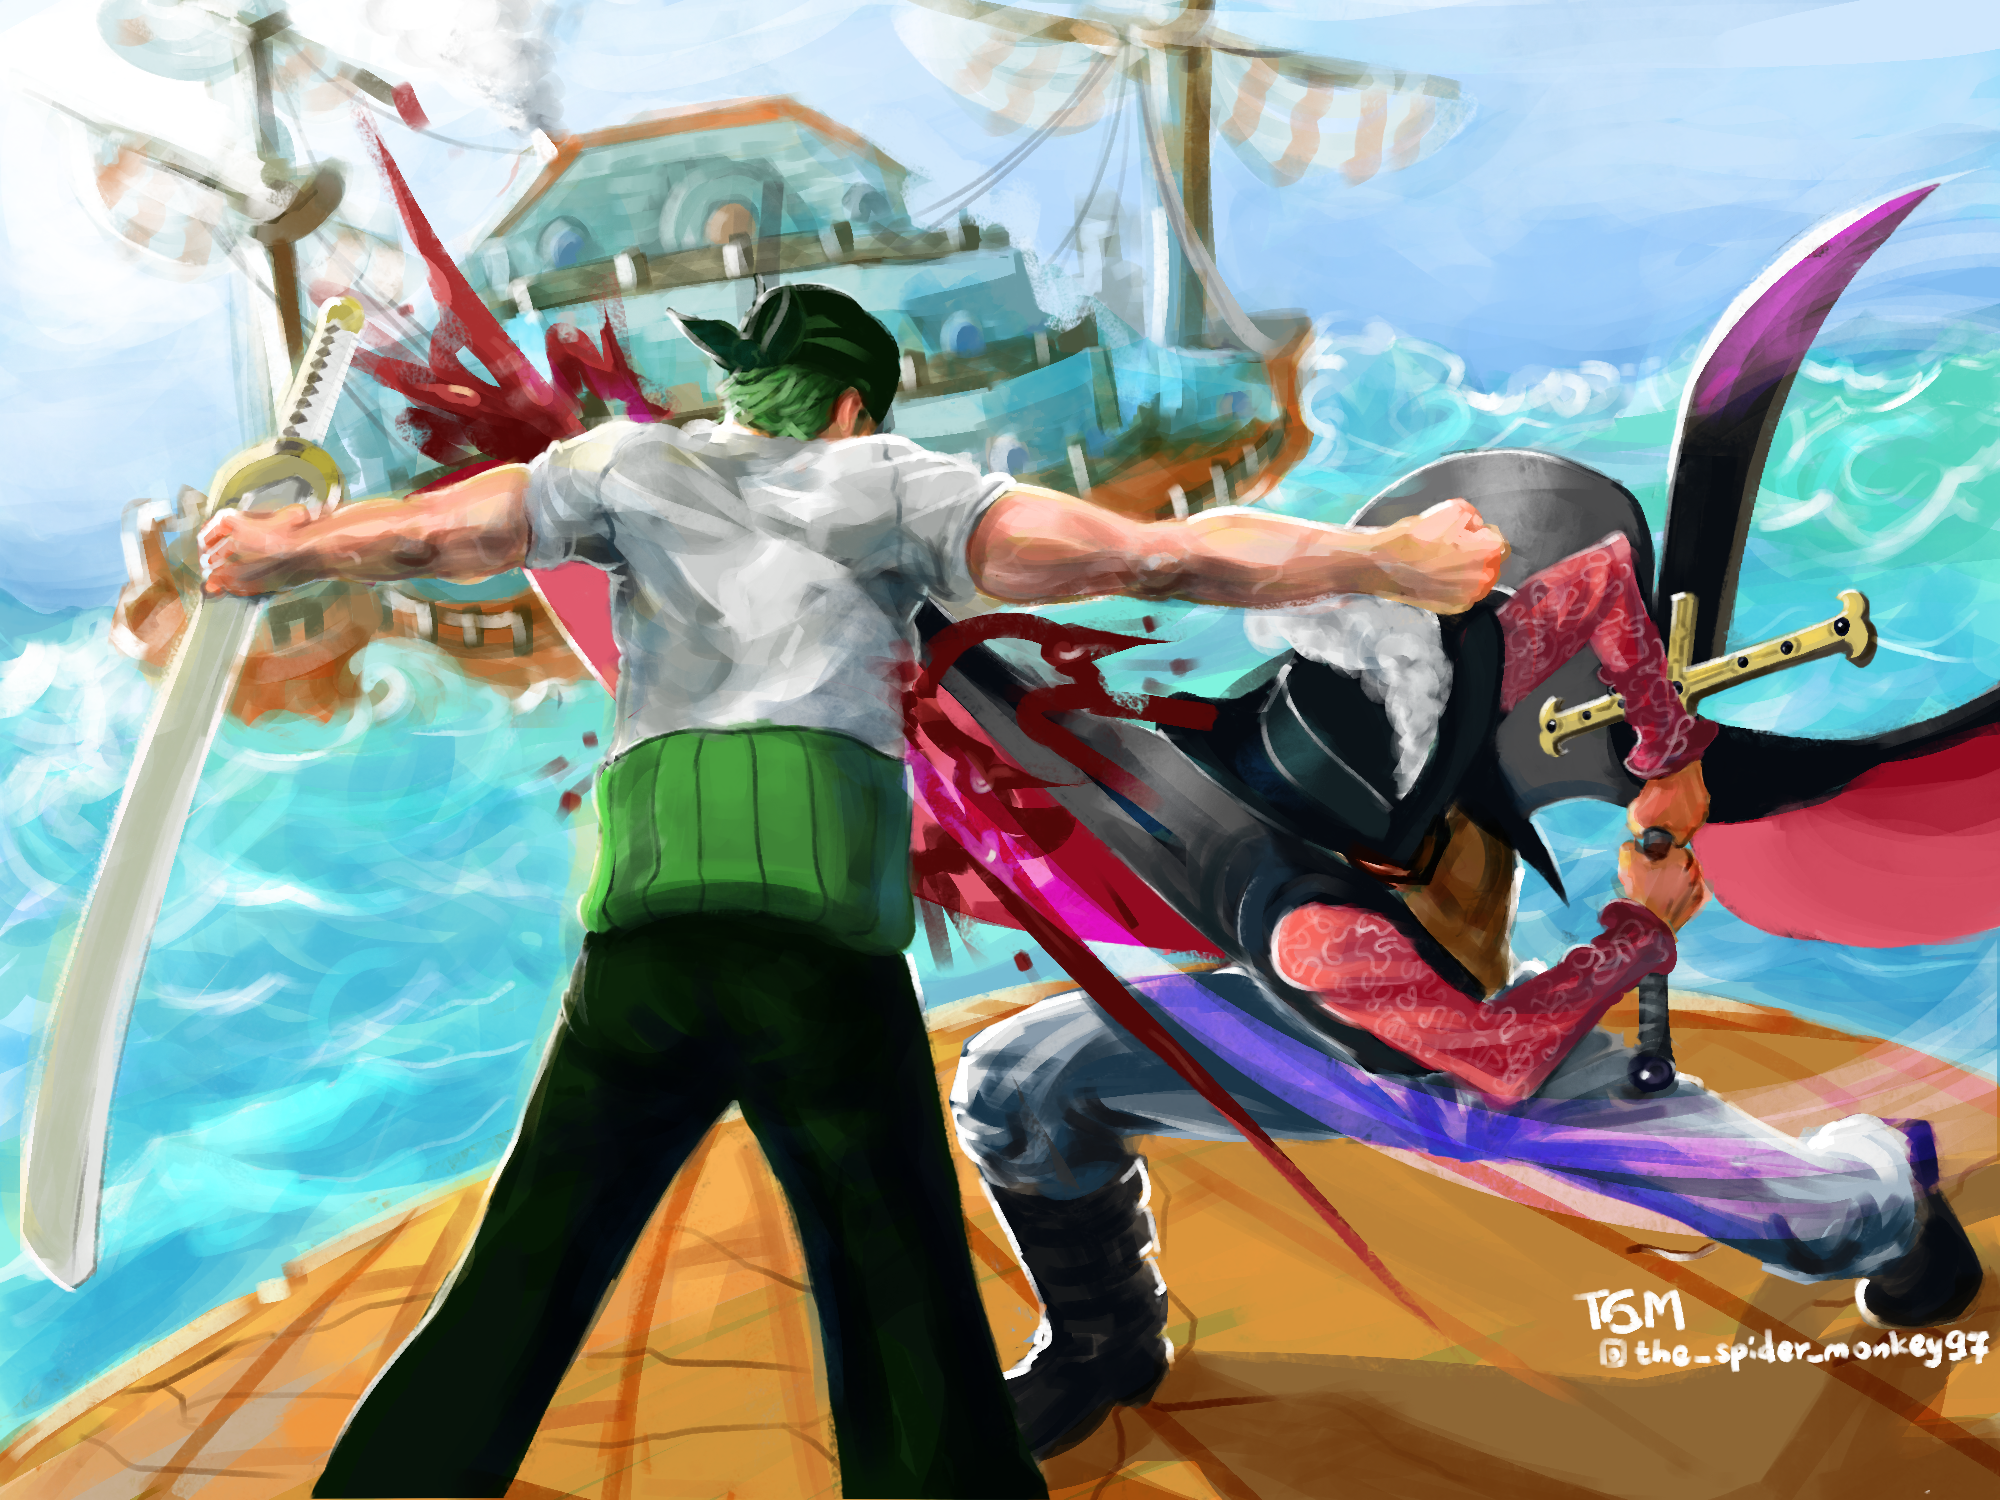 Does Zoro have no interest in fighting Brook, because he knows he is stronger?